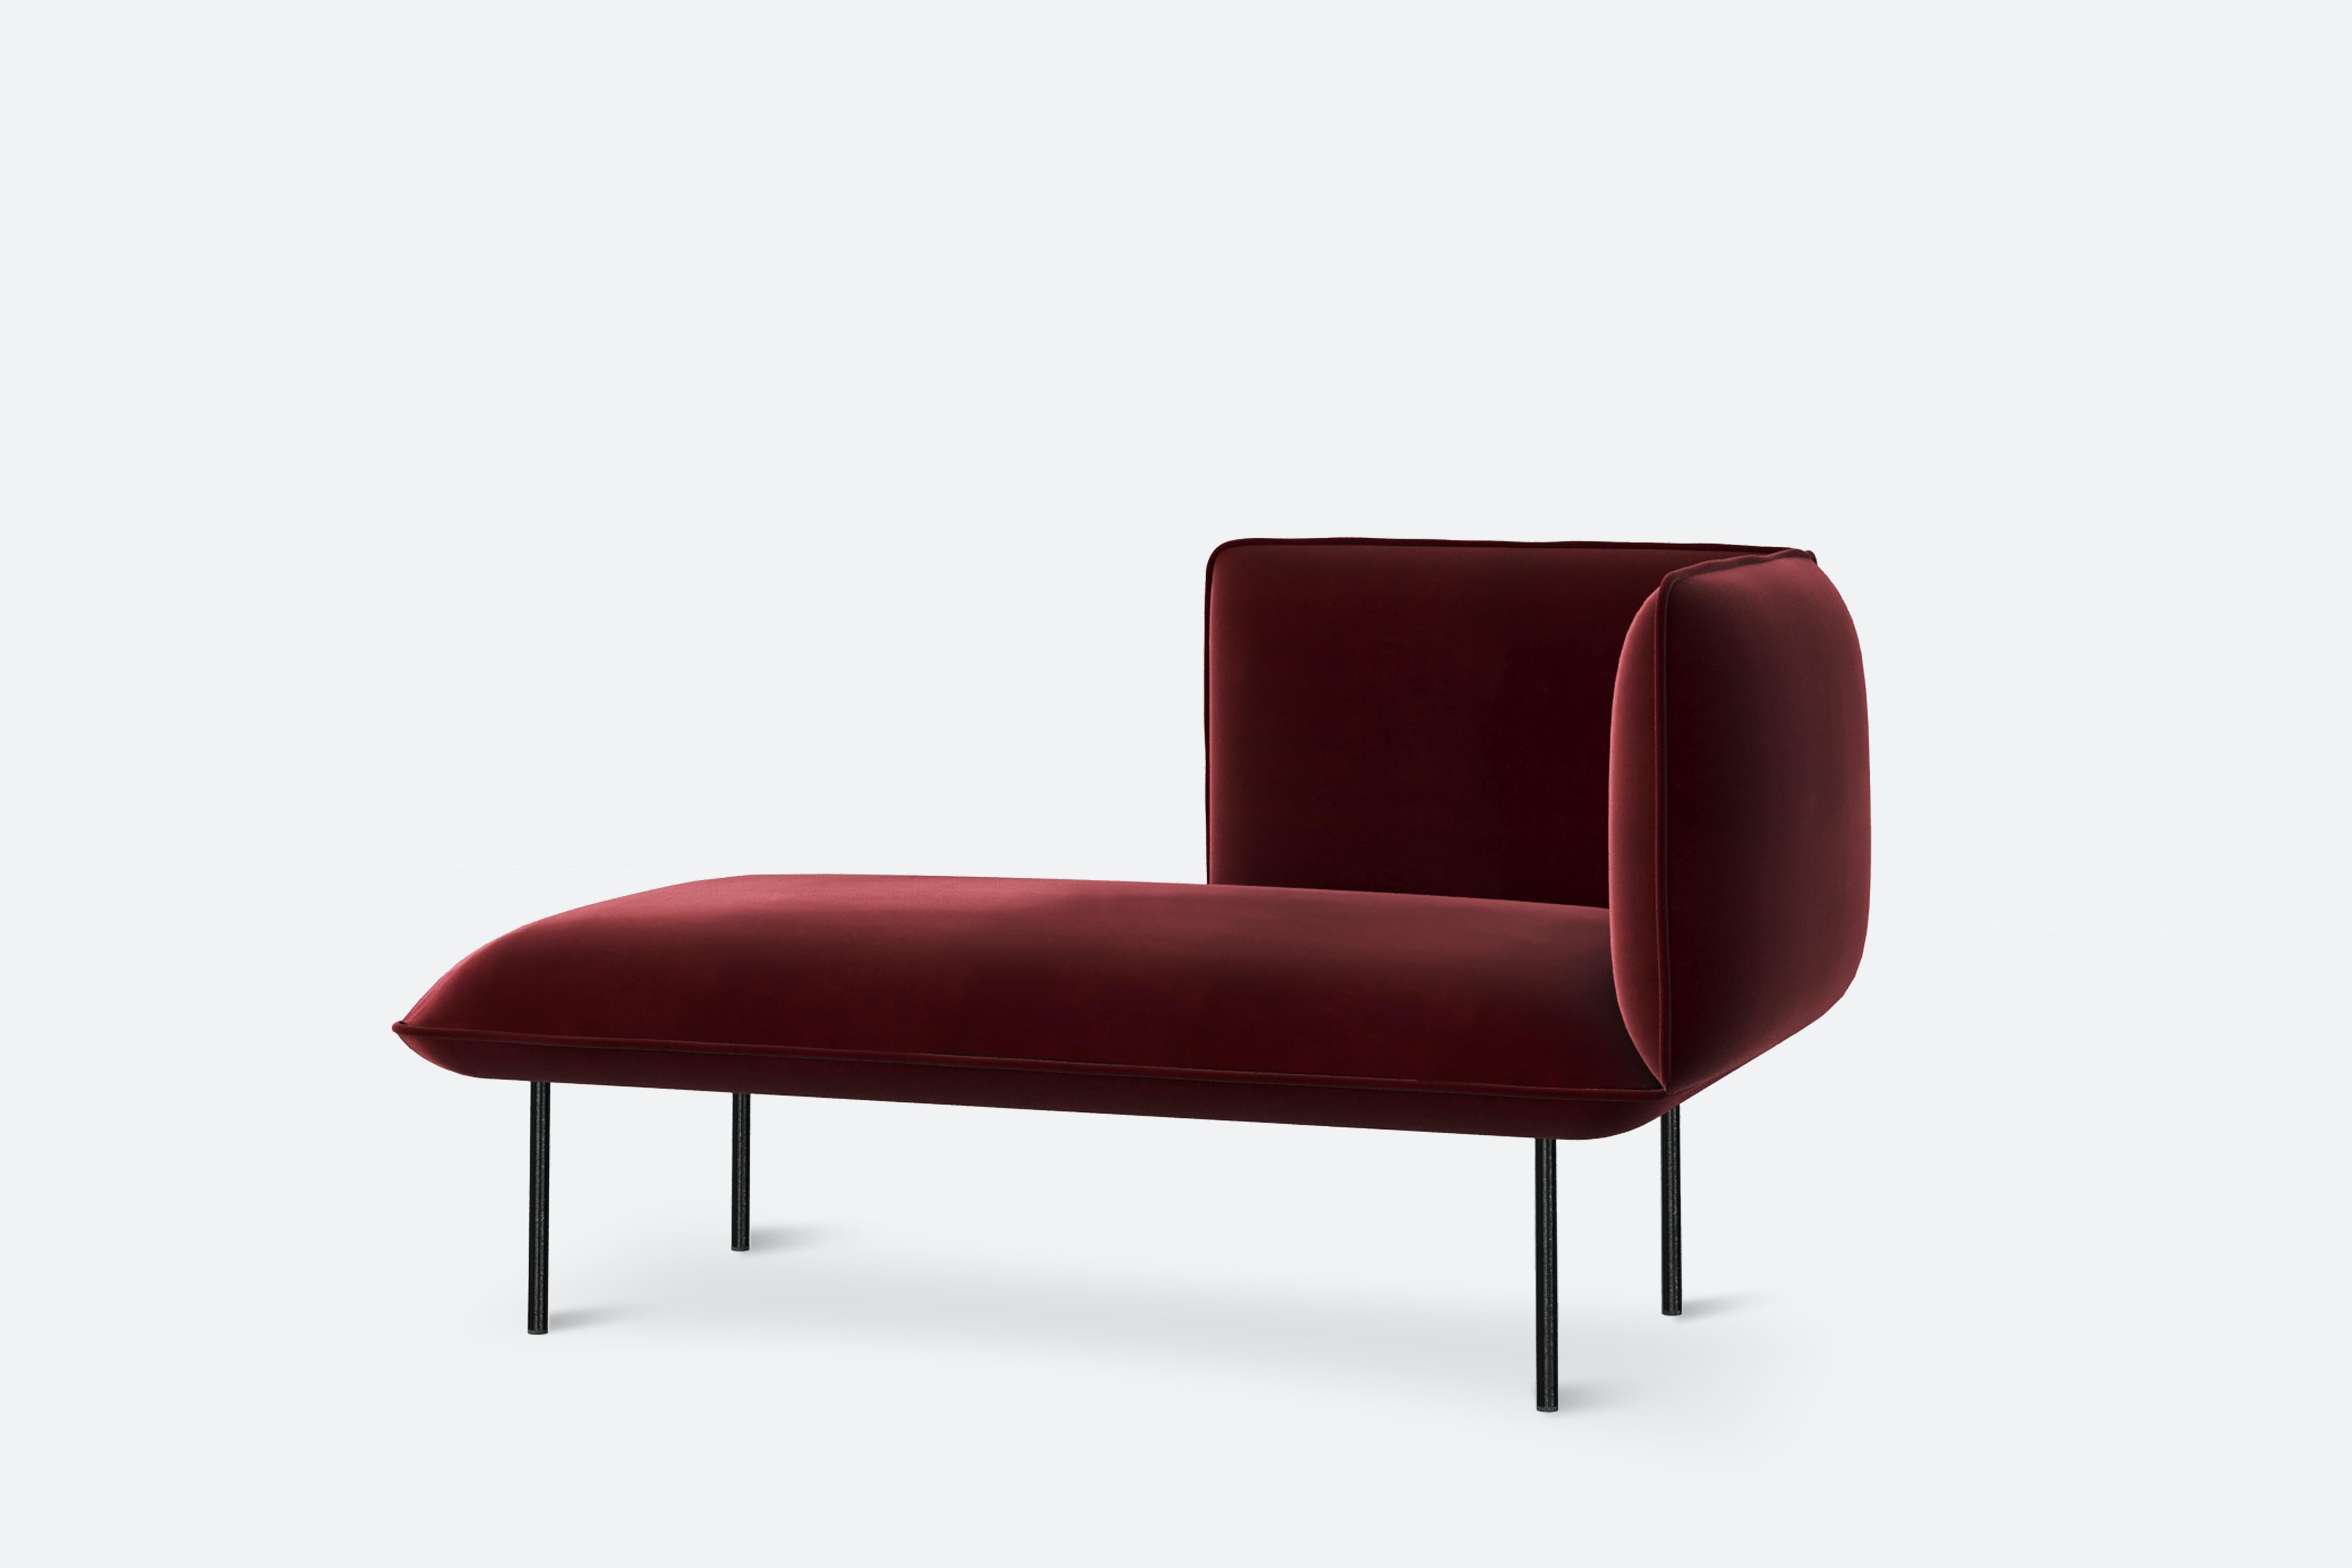 Nakki Lobby Chaise Longue right by Mika Tolvanen.
Materials: foam, plywood, elastic belts, memory foam, fabric (Harald 3).
Dimensions: D 78 x W 150 x H 82 cm.
Also available in different colours and materials. 

The founders, Mia and Torben